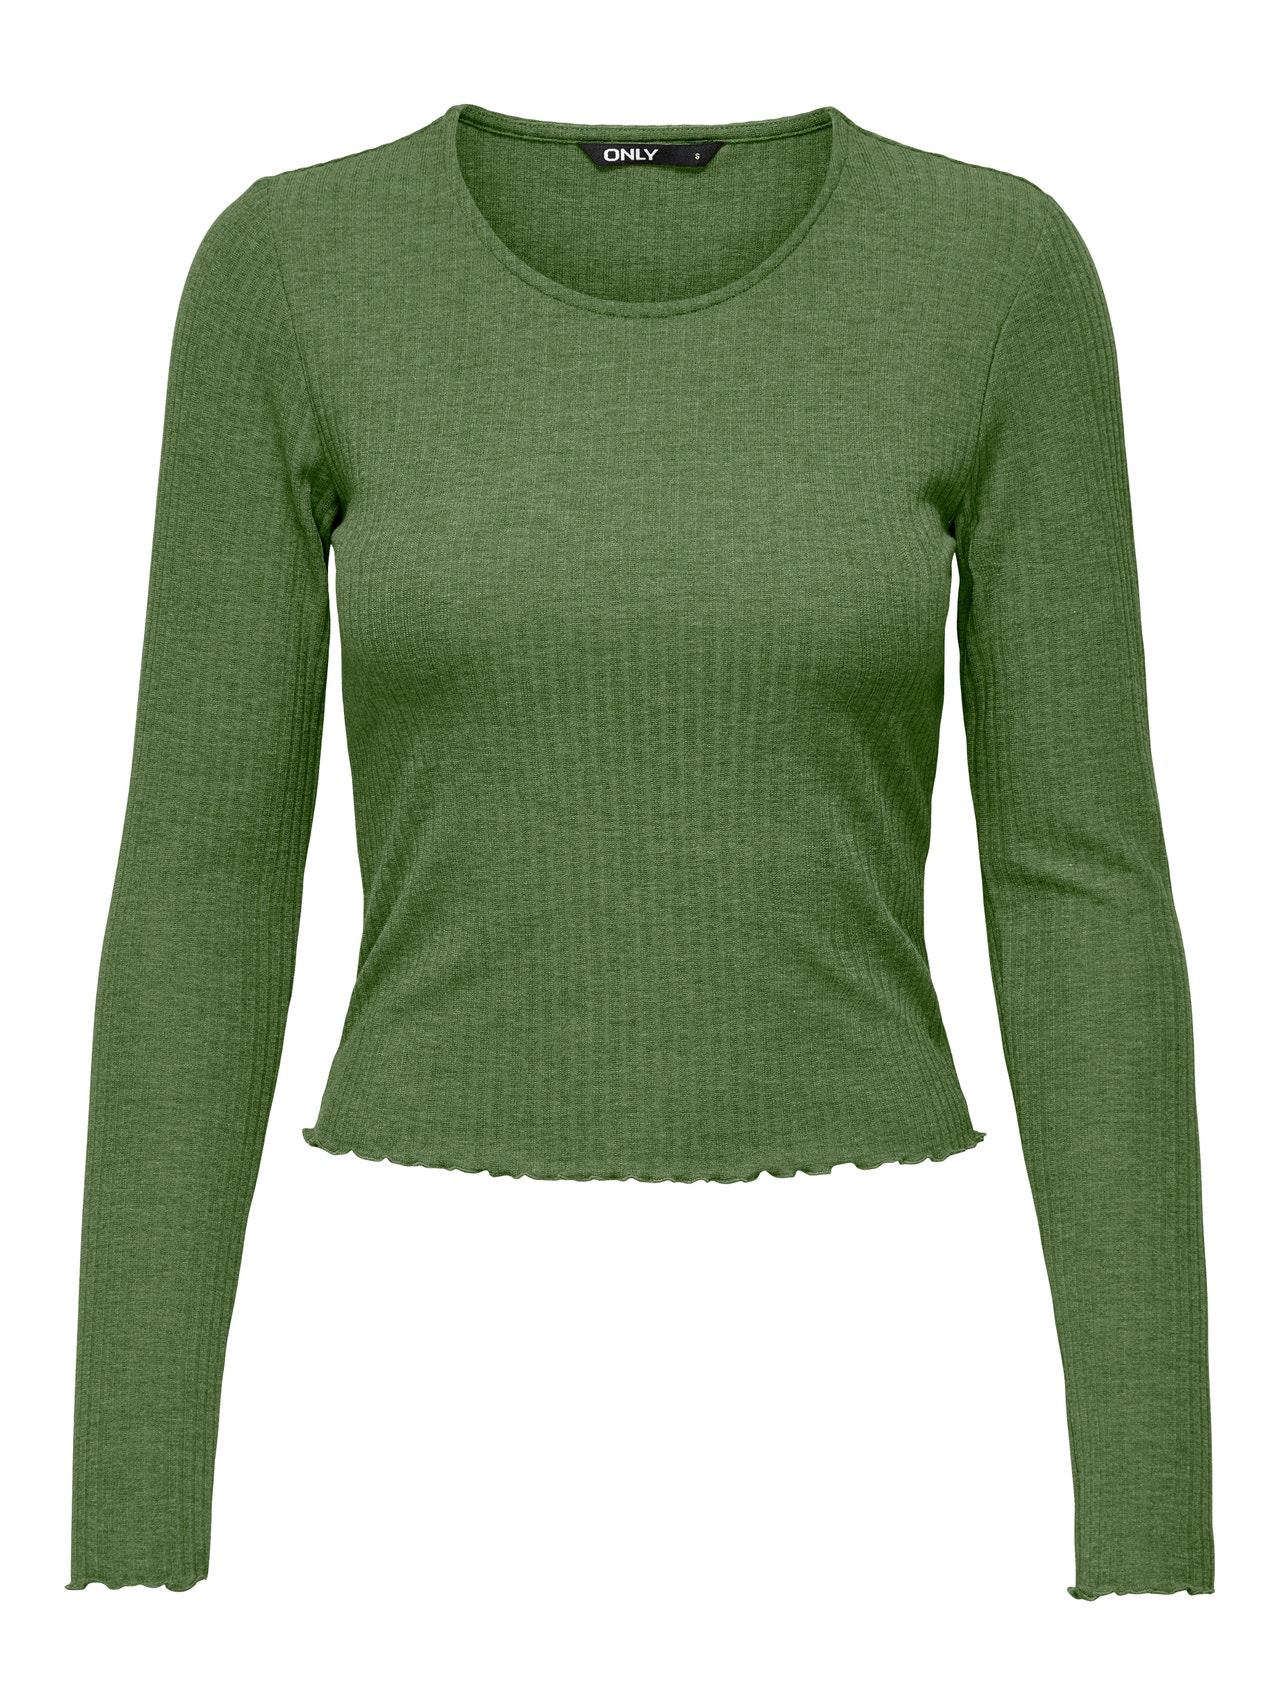 ONLY Slim Fit Round Neck Top -Chive - 15298796